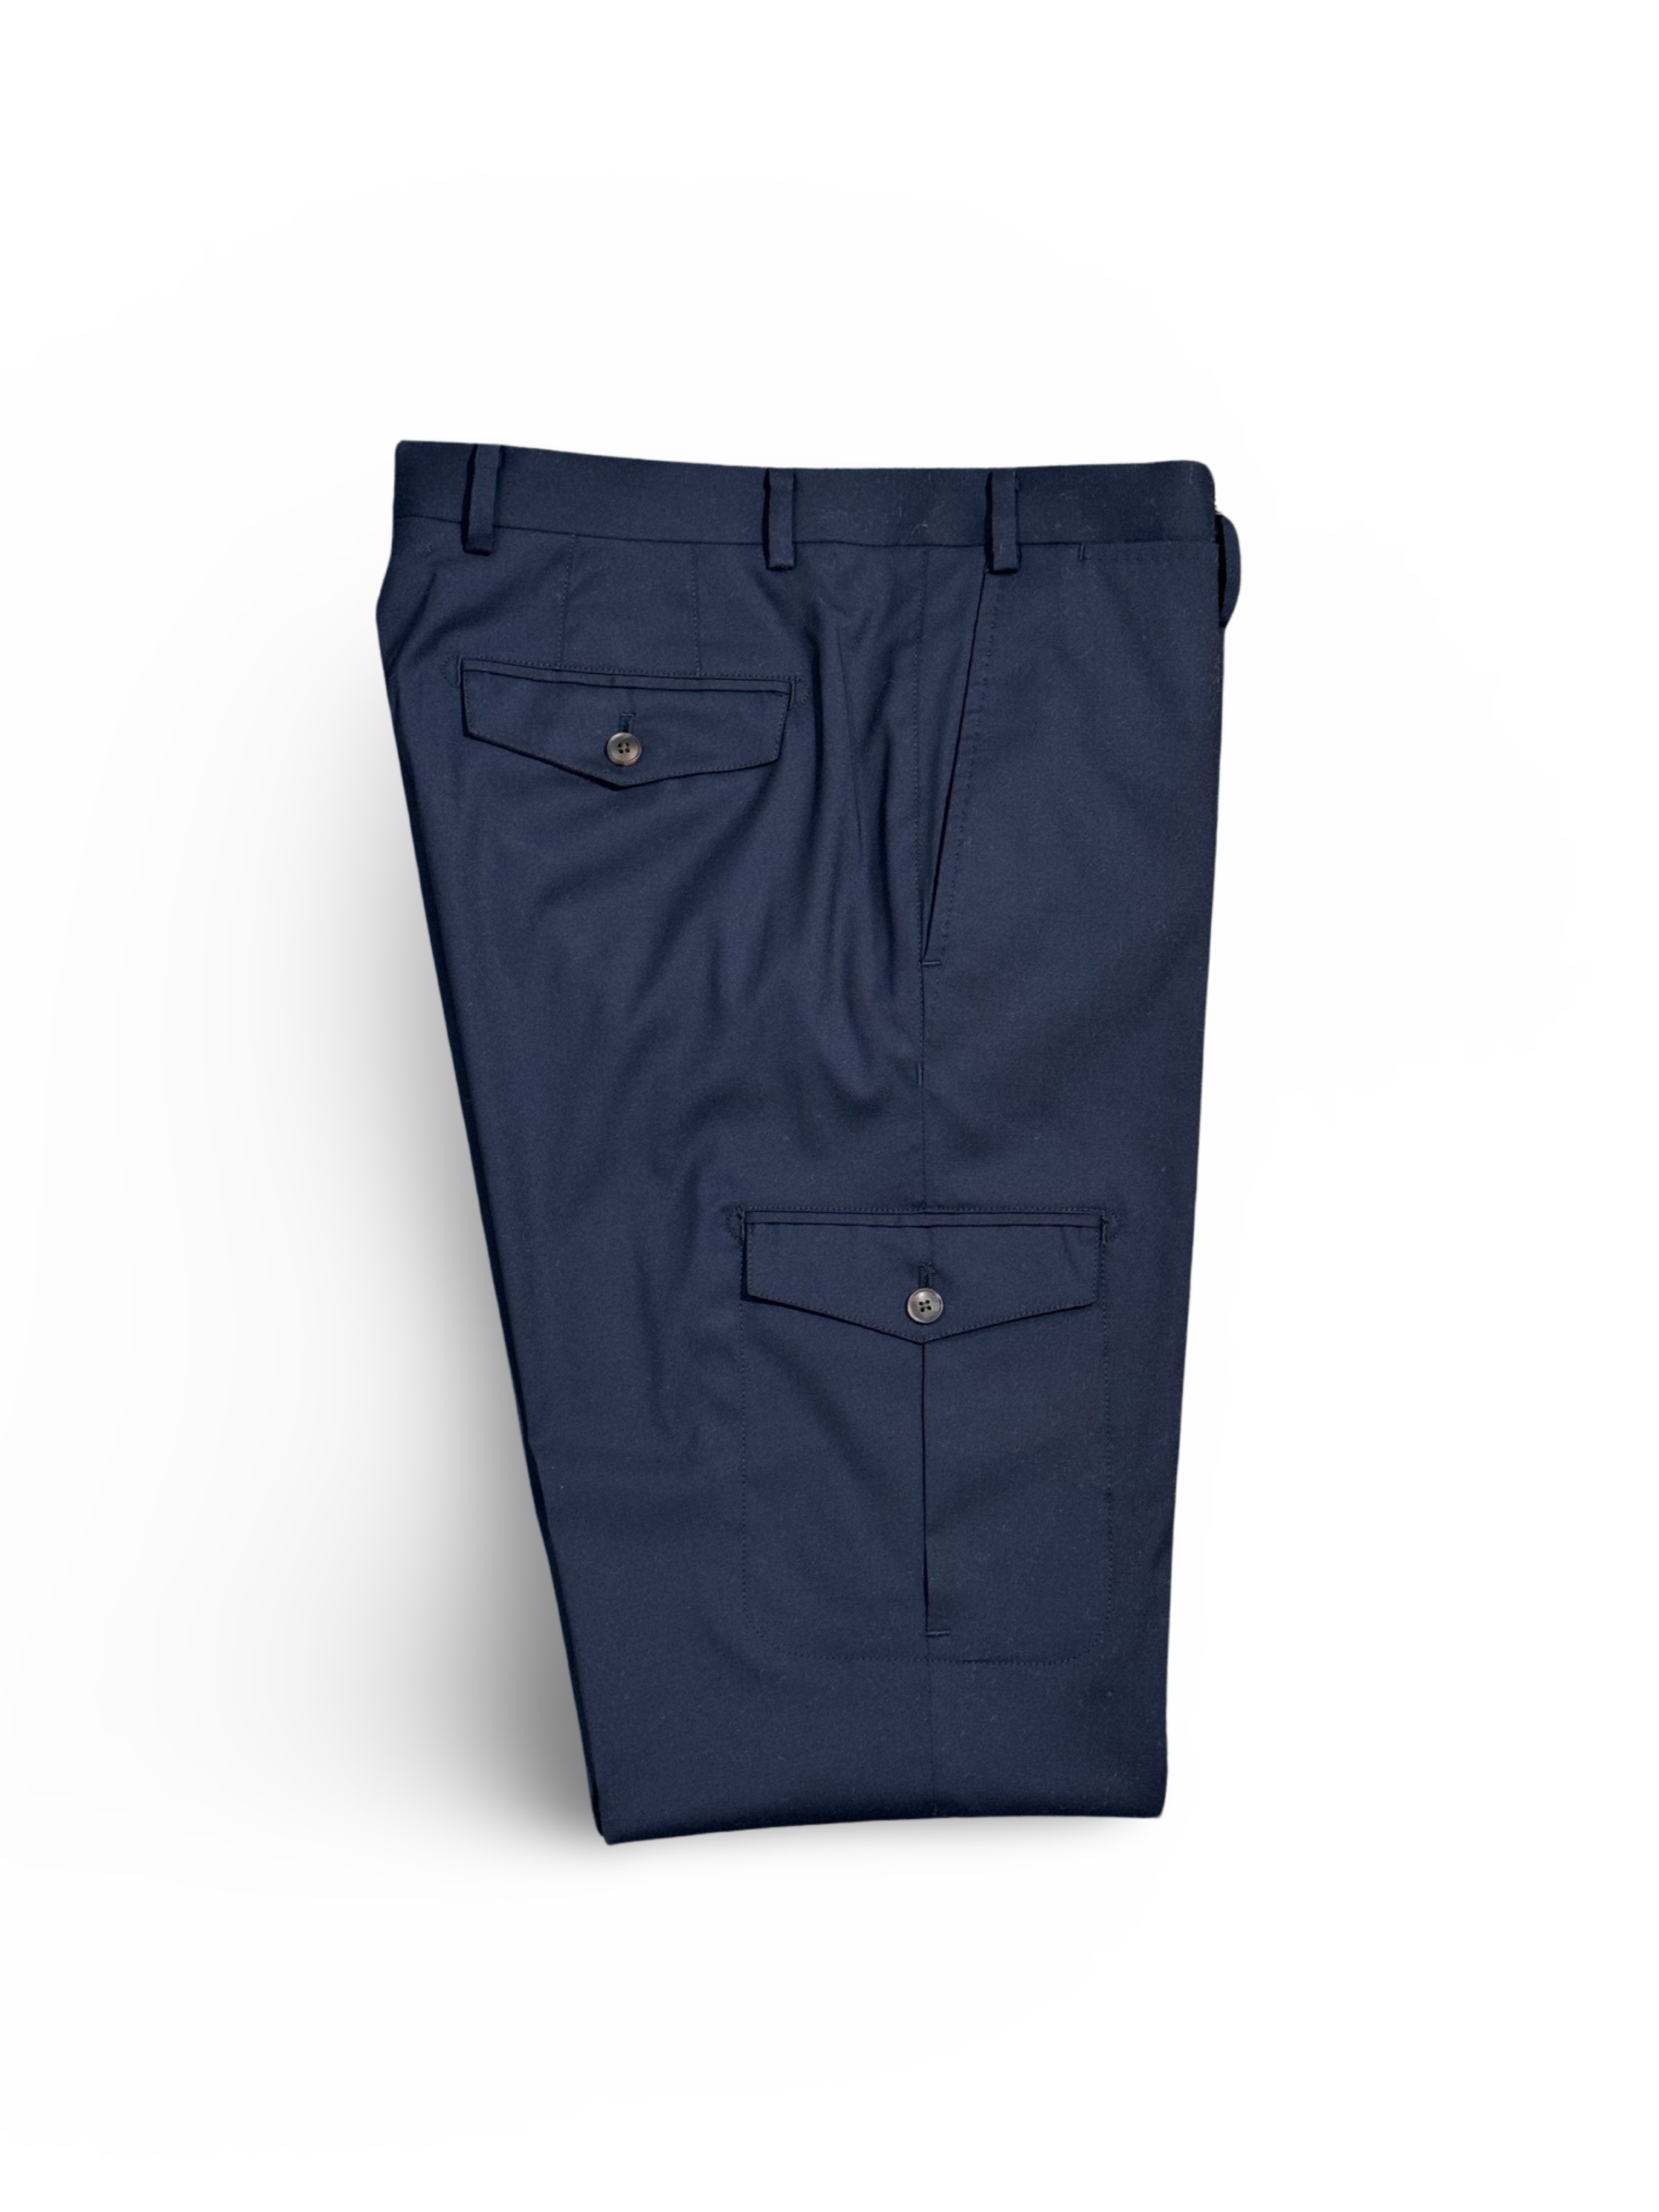 Utility Trousers - Navy